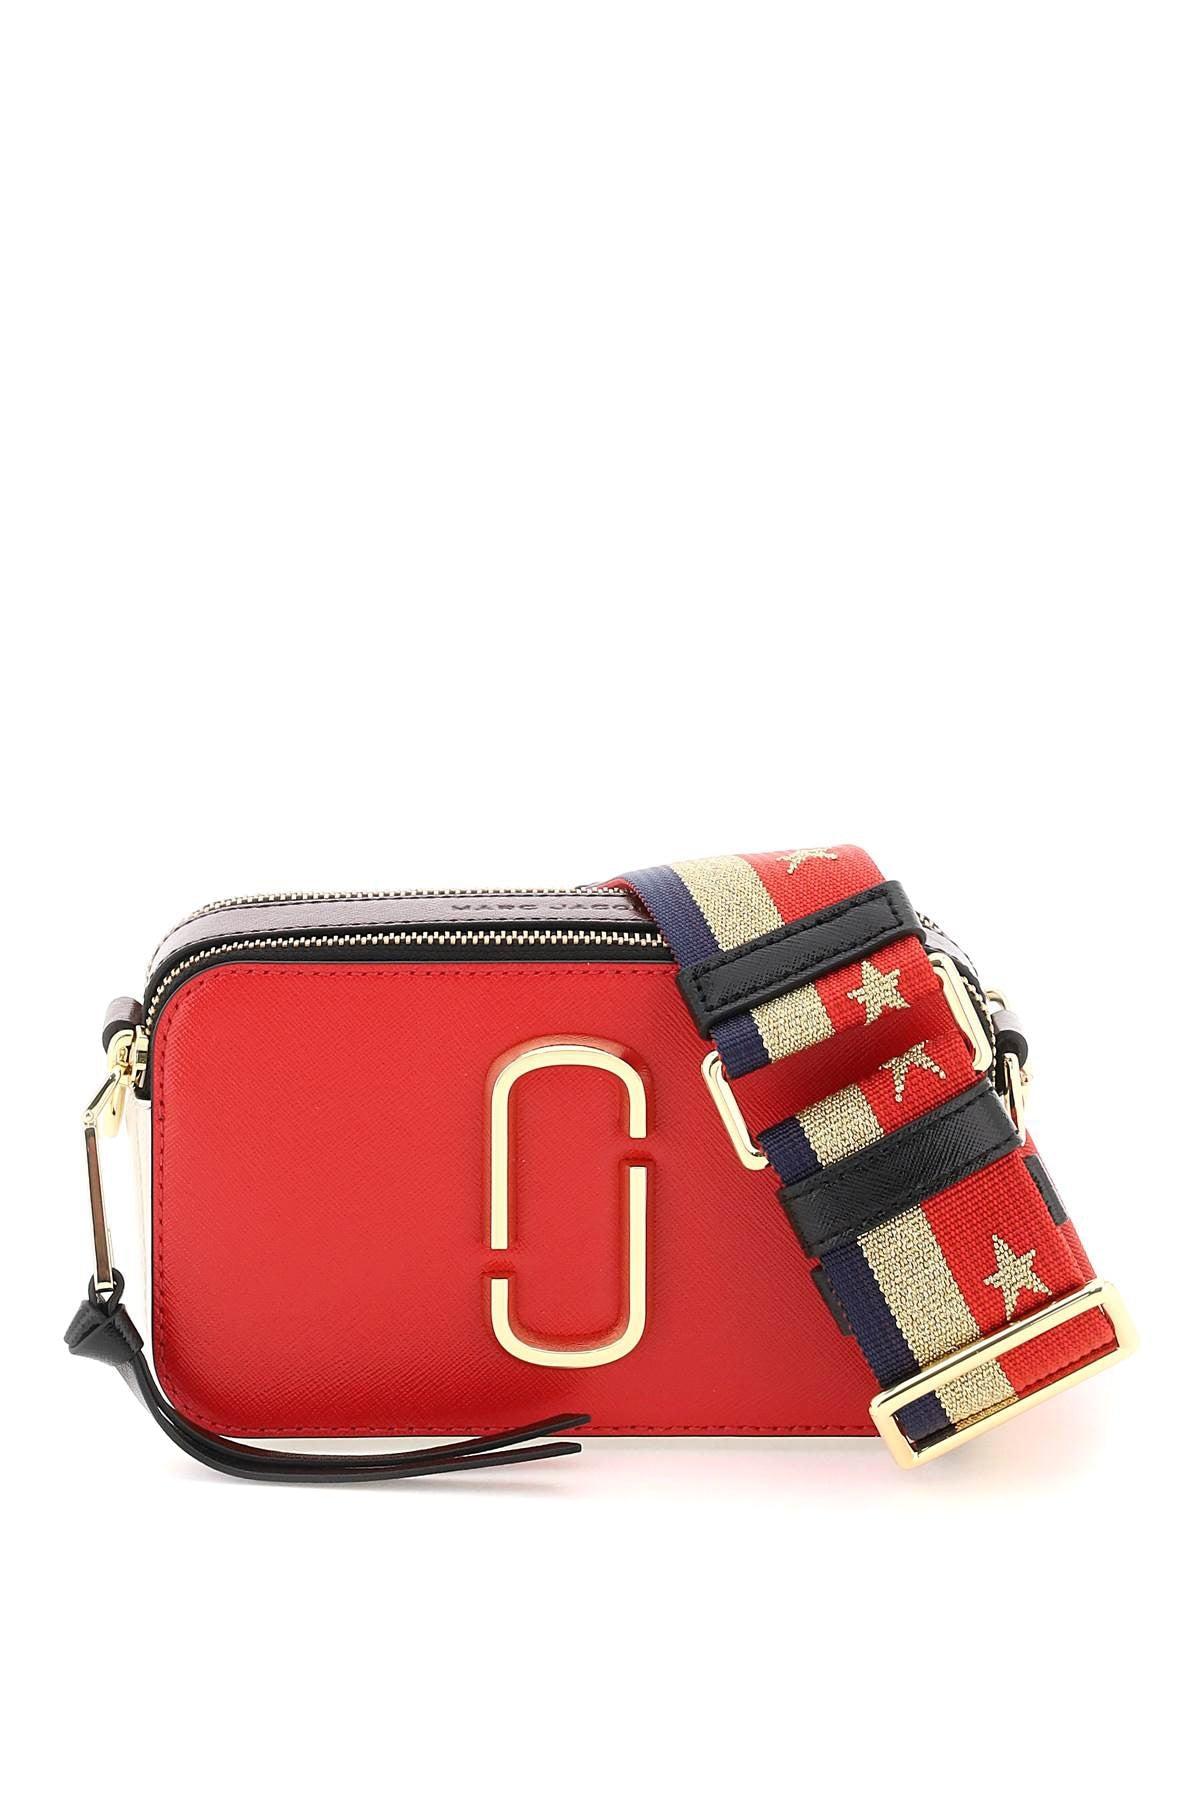 Marc Jacobs White and Red Snapshot Bag